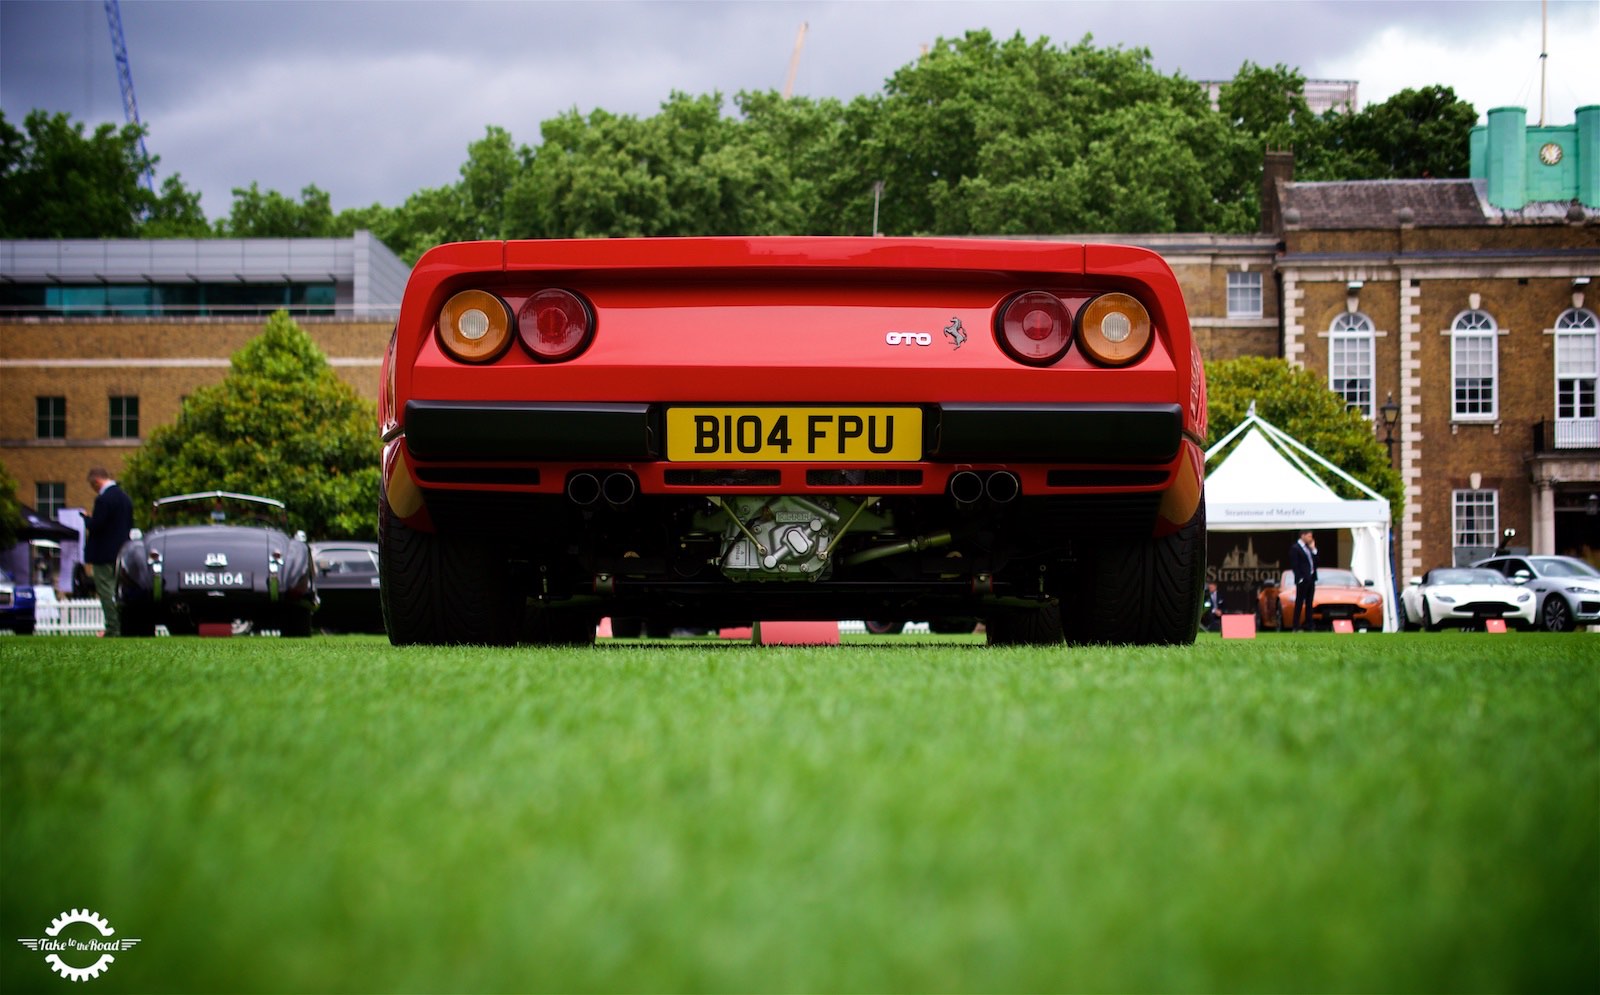 London Concours rescheduled to August